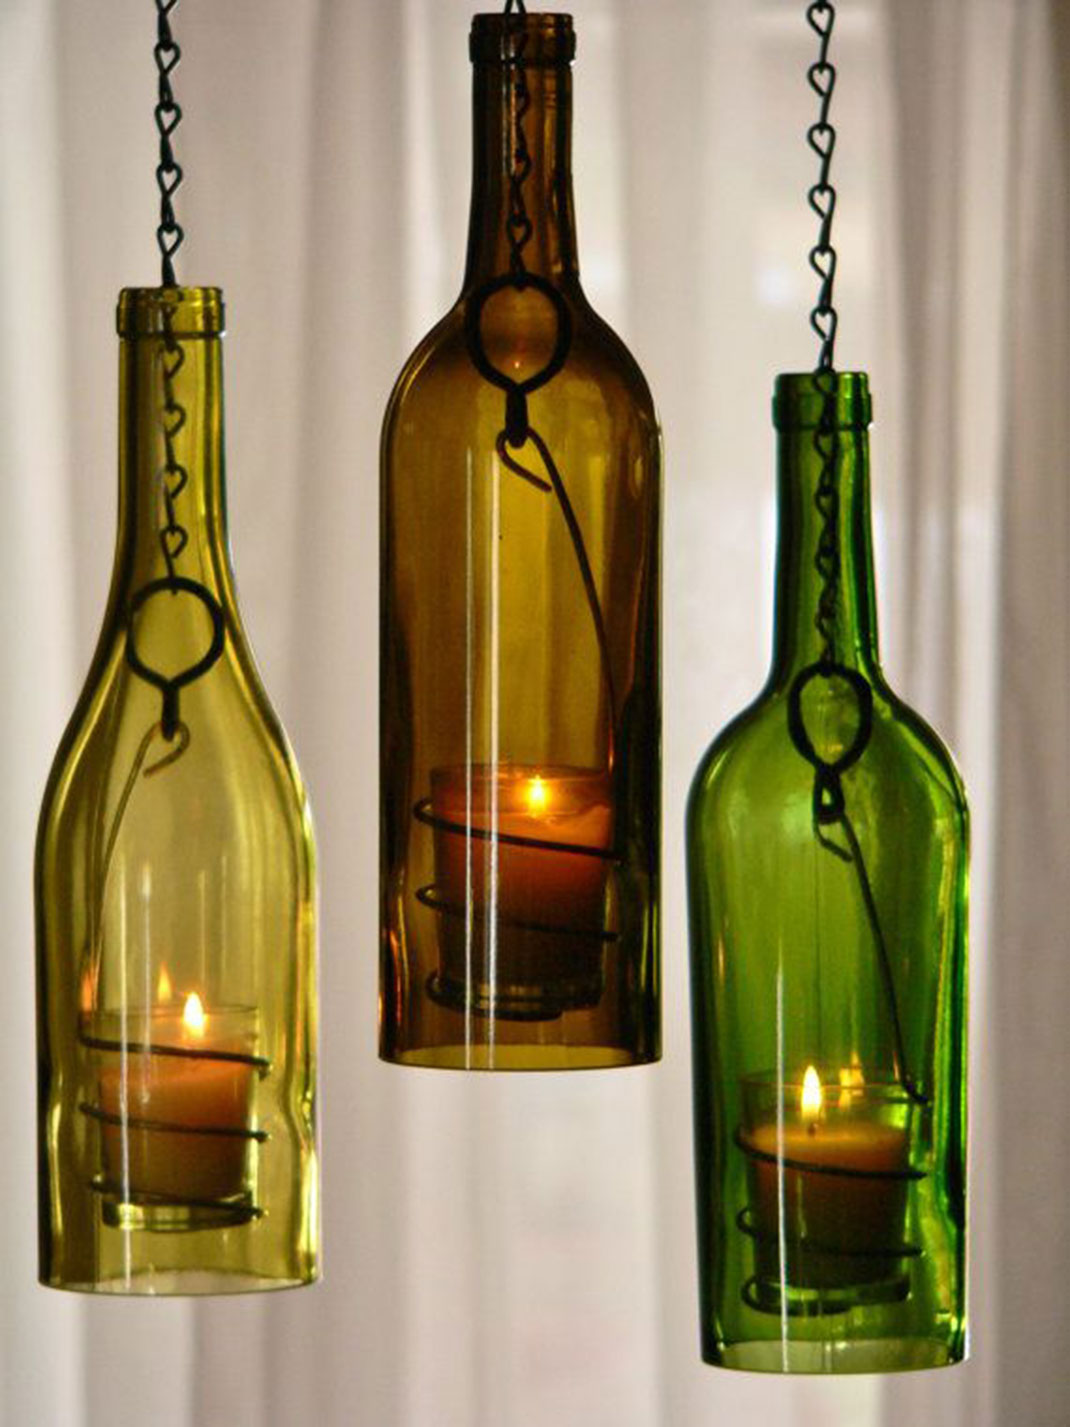 29 Ideas To Help You Recycle Your Glass Bottles Cleverly--26